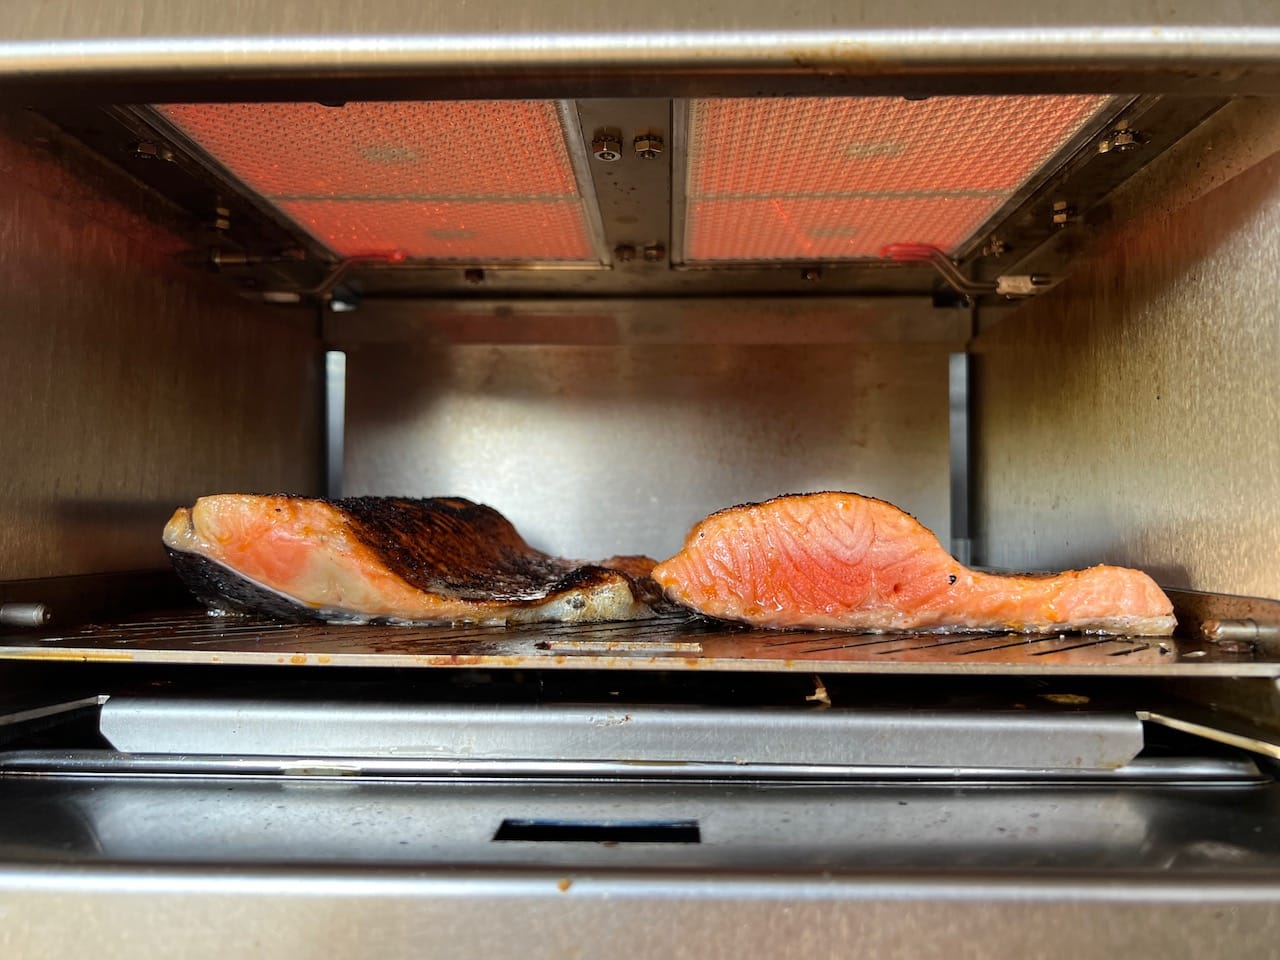 Salmon filets cooking at lowest setting in the Schwank Infrared Grill.